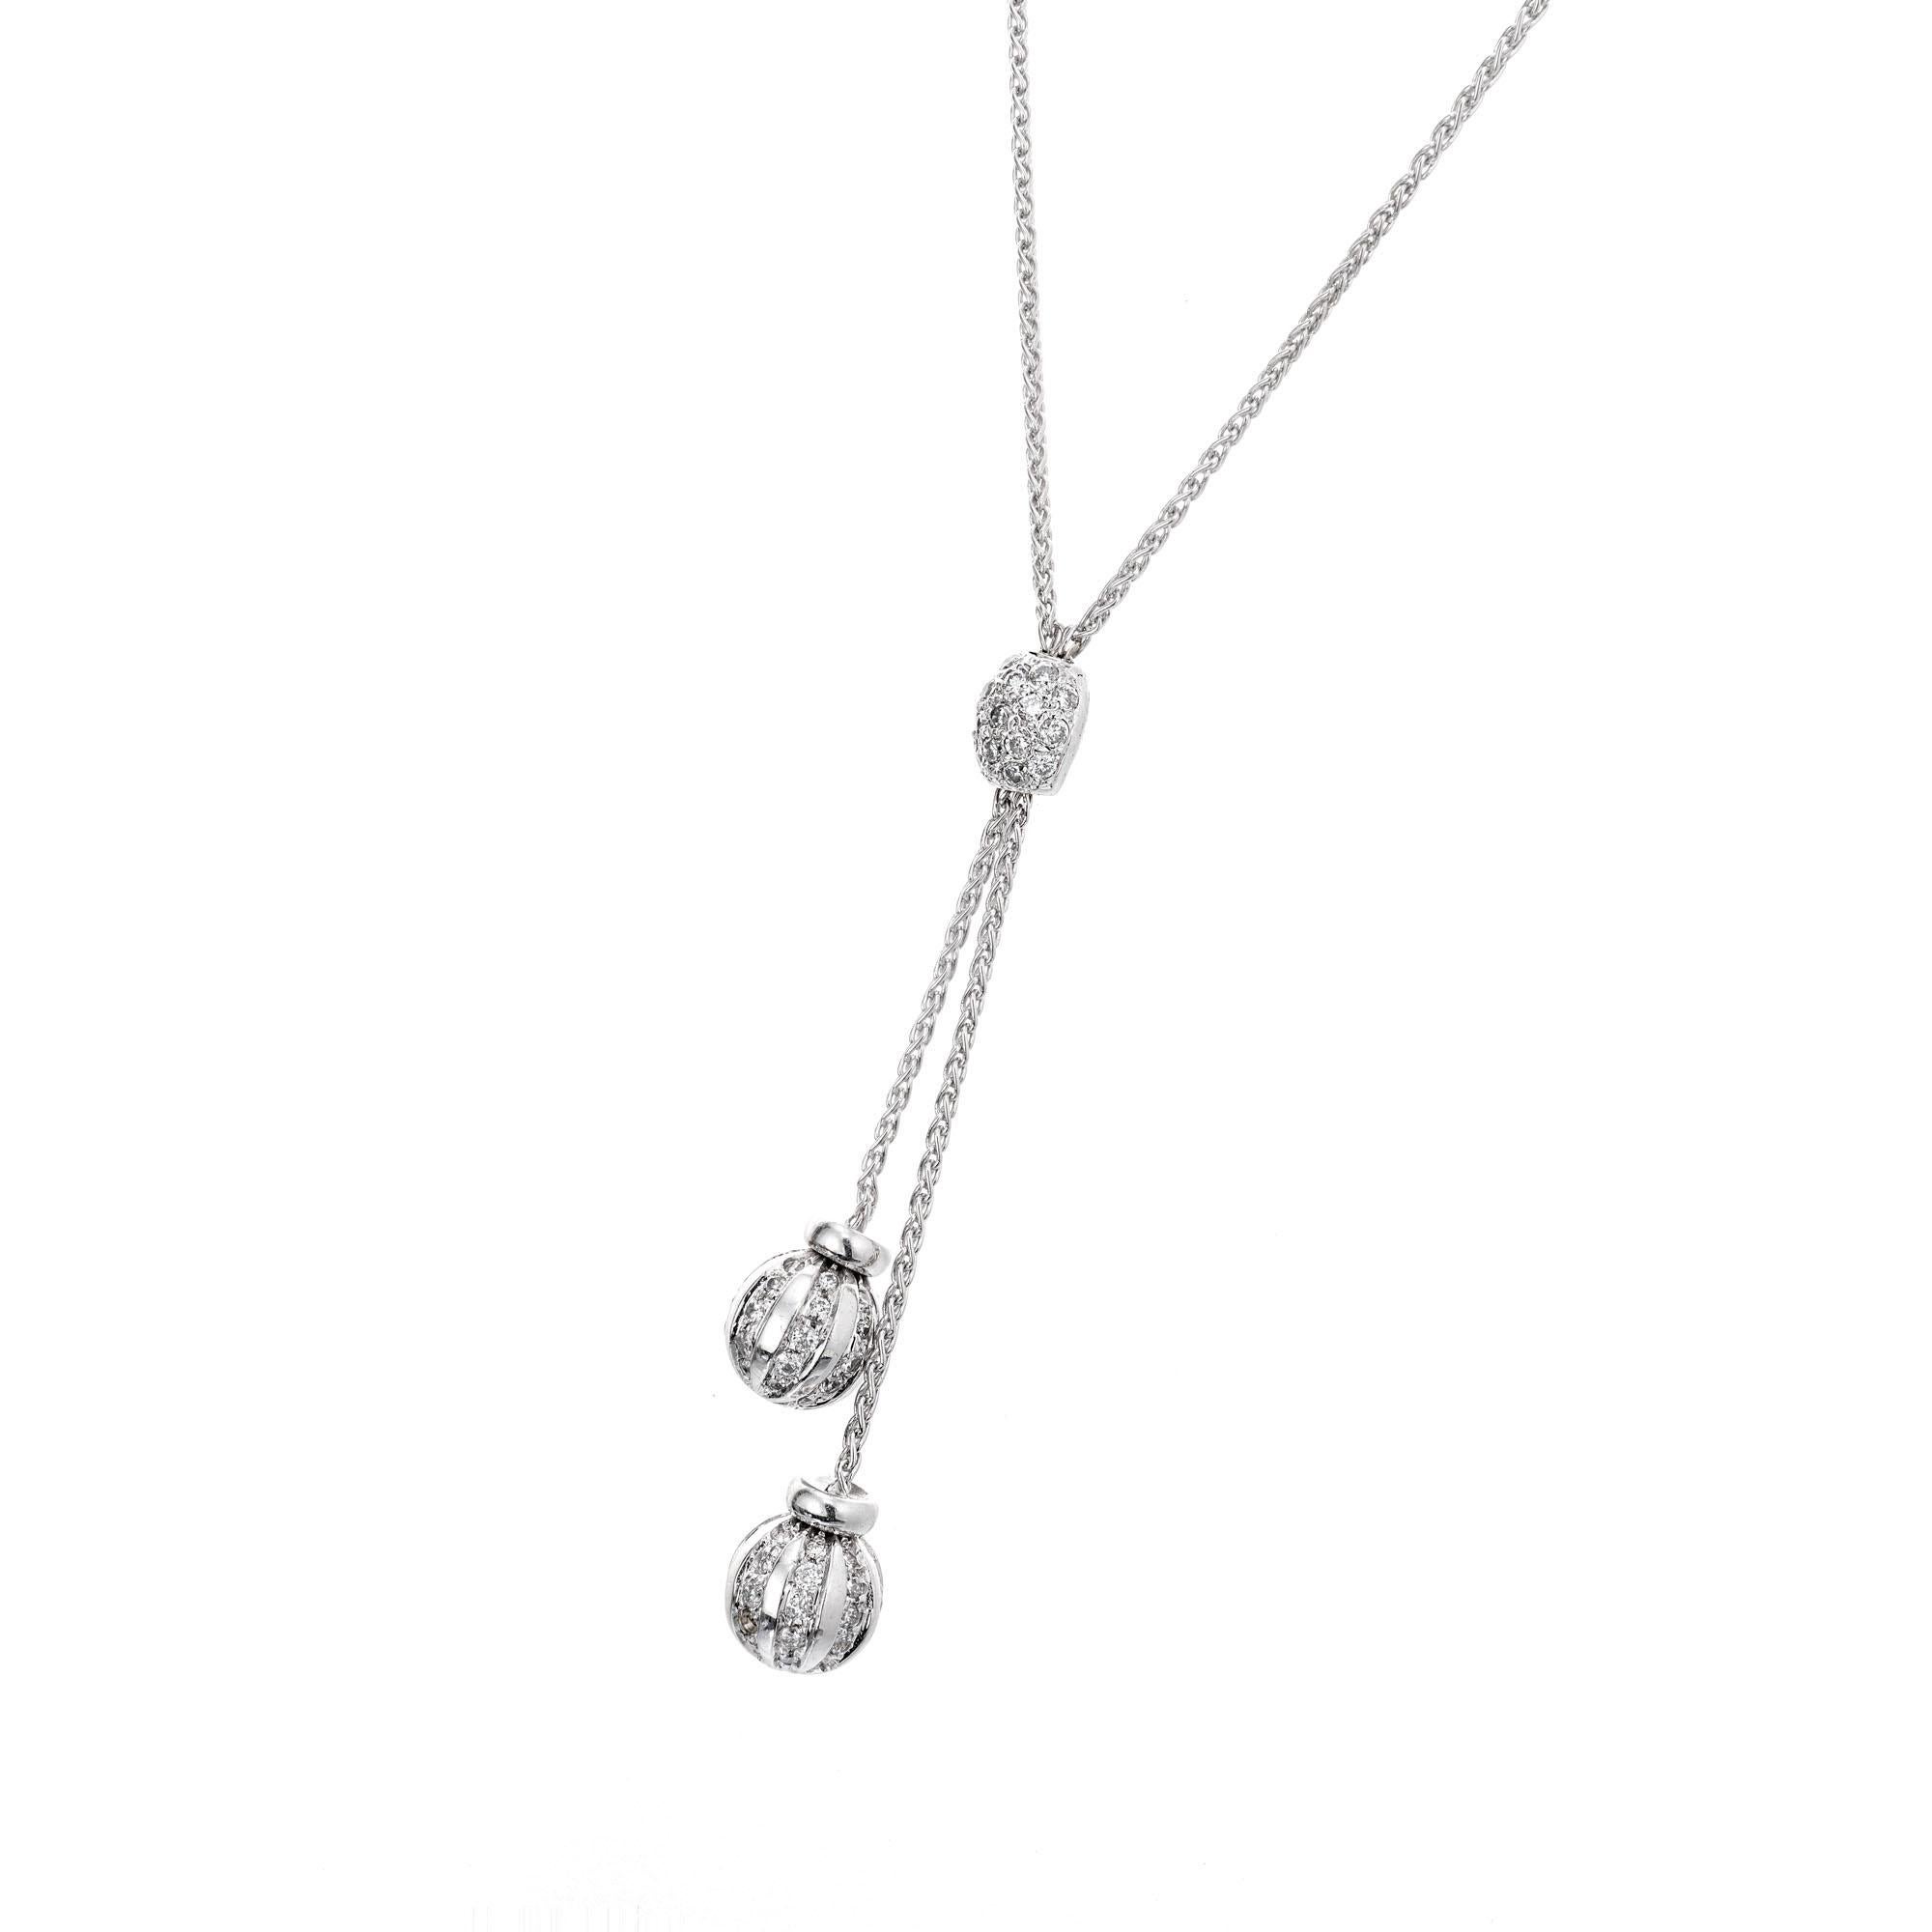 Pave Diamond ball “Y” necklace in 14k white gold with 87 full cut round diamonds. Length 20 inches. 

14k white gold
87 round full cut Diamonds, approx. total weight .87cts, H, SI
10.6 grams
10.6 grams
Length: 20 inches – Width: 1.31mm – Depth: